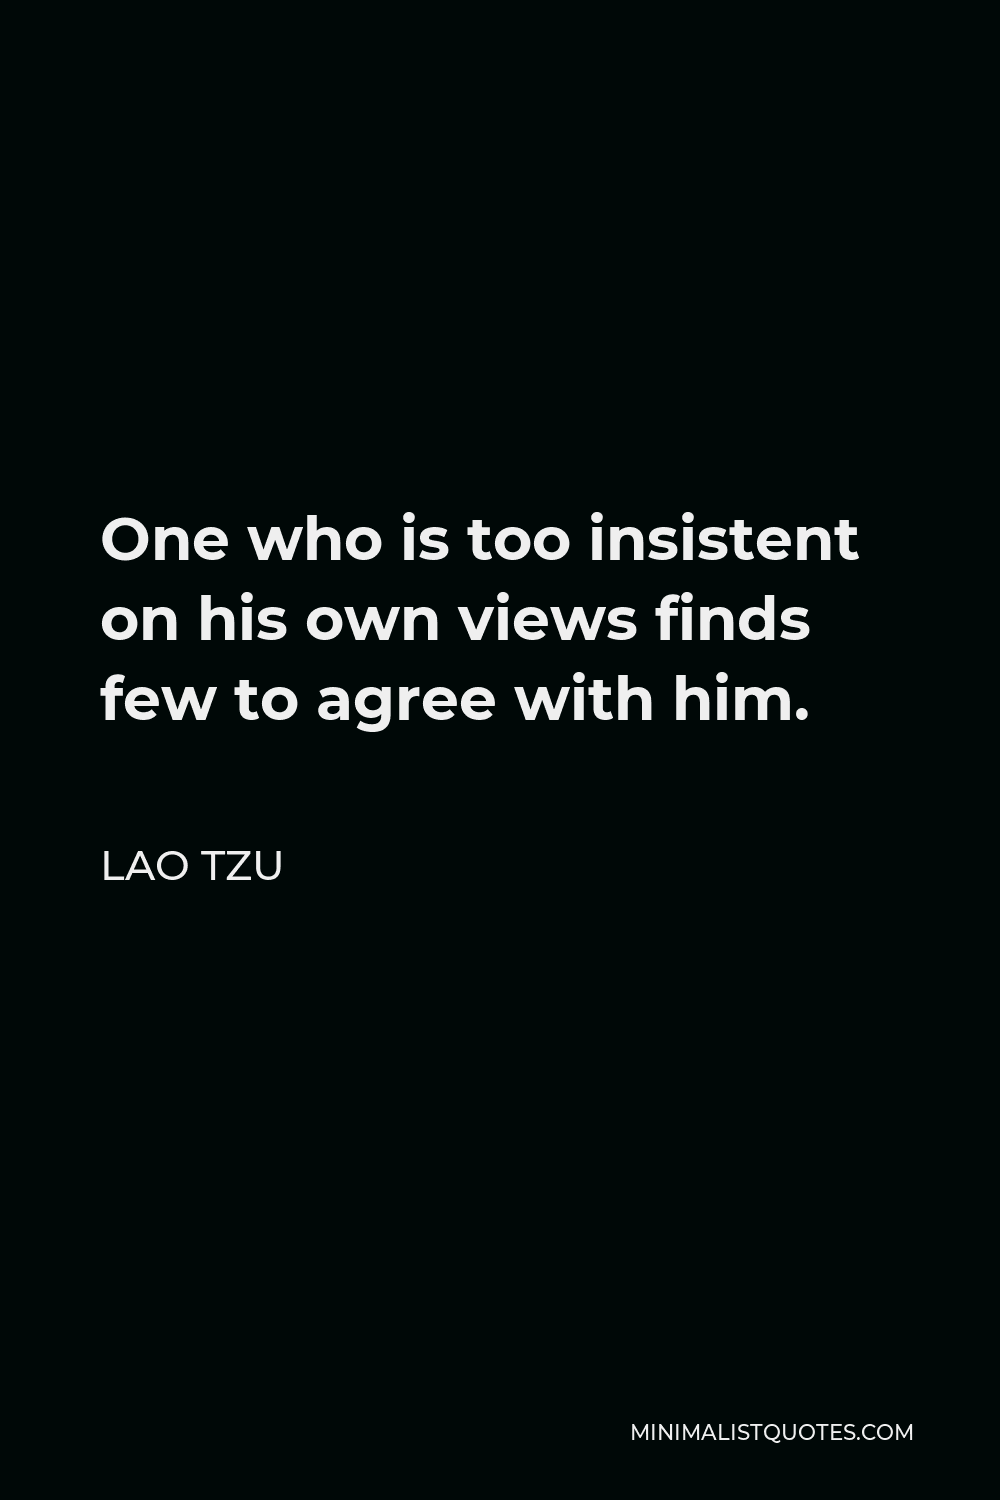 Lao Tzu Quote - One who is too insistent on his own views finds few to agree with him.